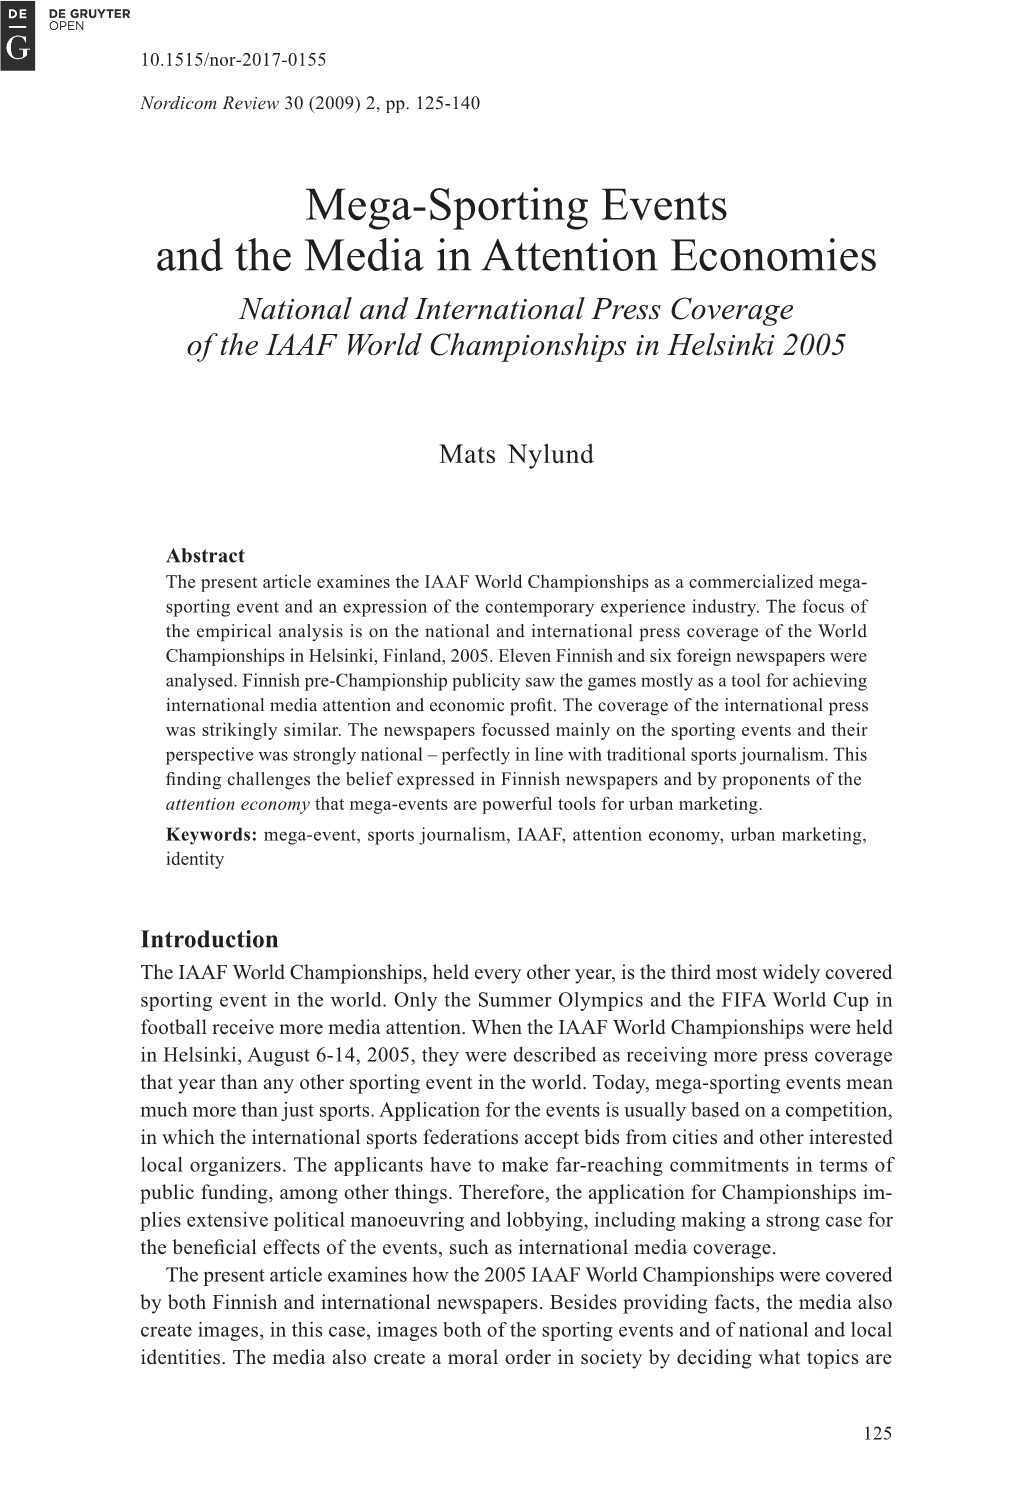 Mega-Sporting Events and the Media in Attention Economies National and International Press Coverage of the IAAF World Championships in Helsinki 2005